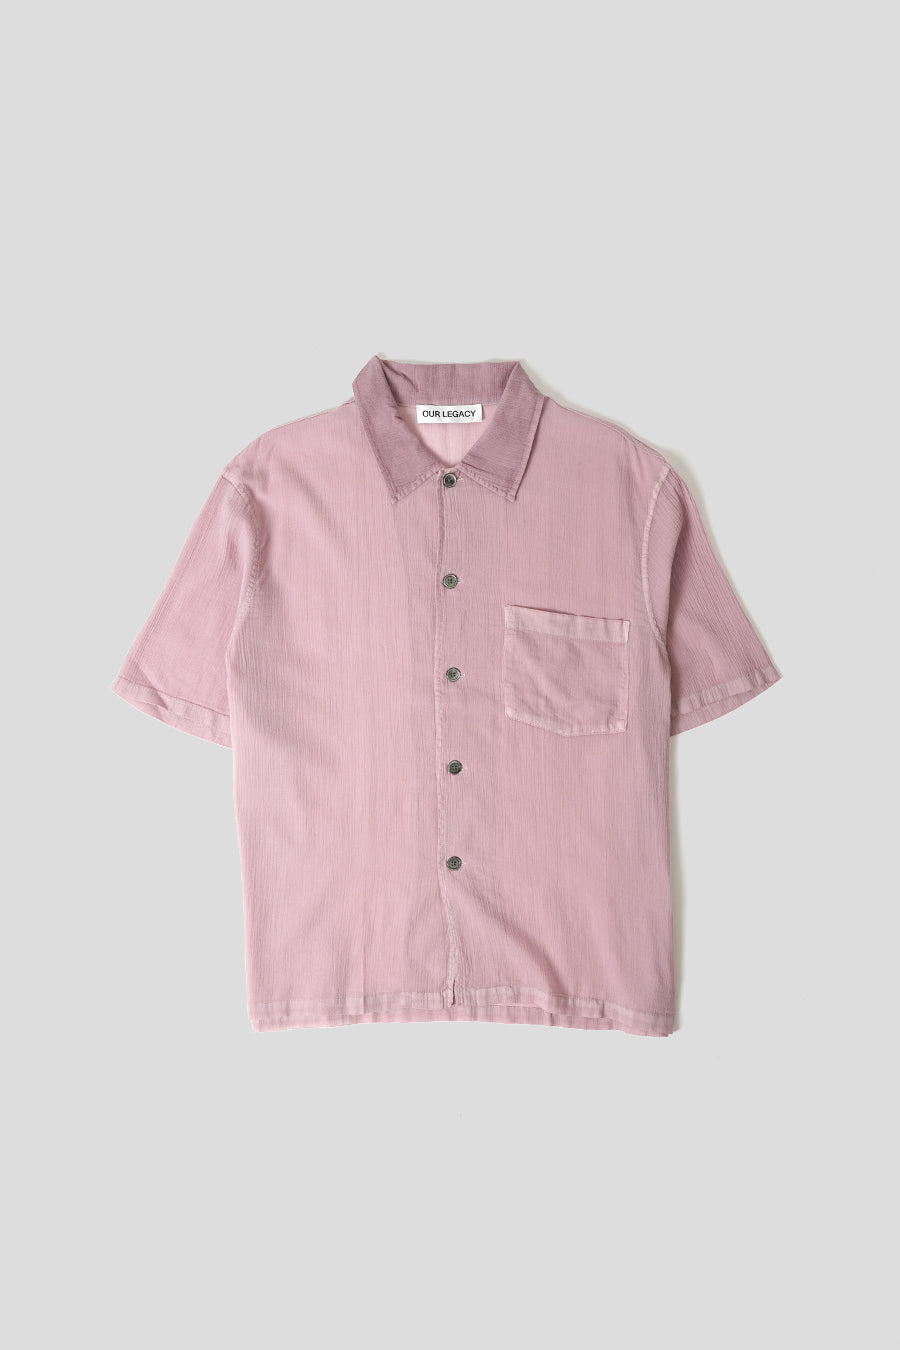 Our Legacy - CHEMISE MANCHES COURTES COATED VOILE DUSTY LILAC - LE LABO STORE